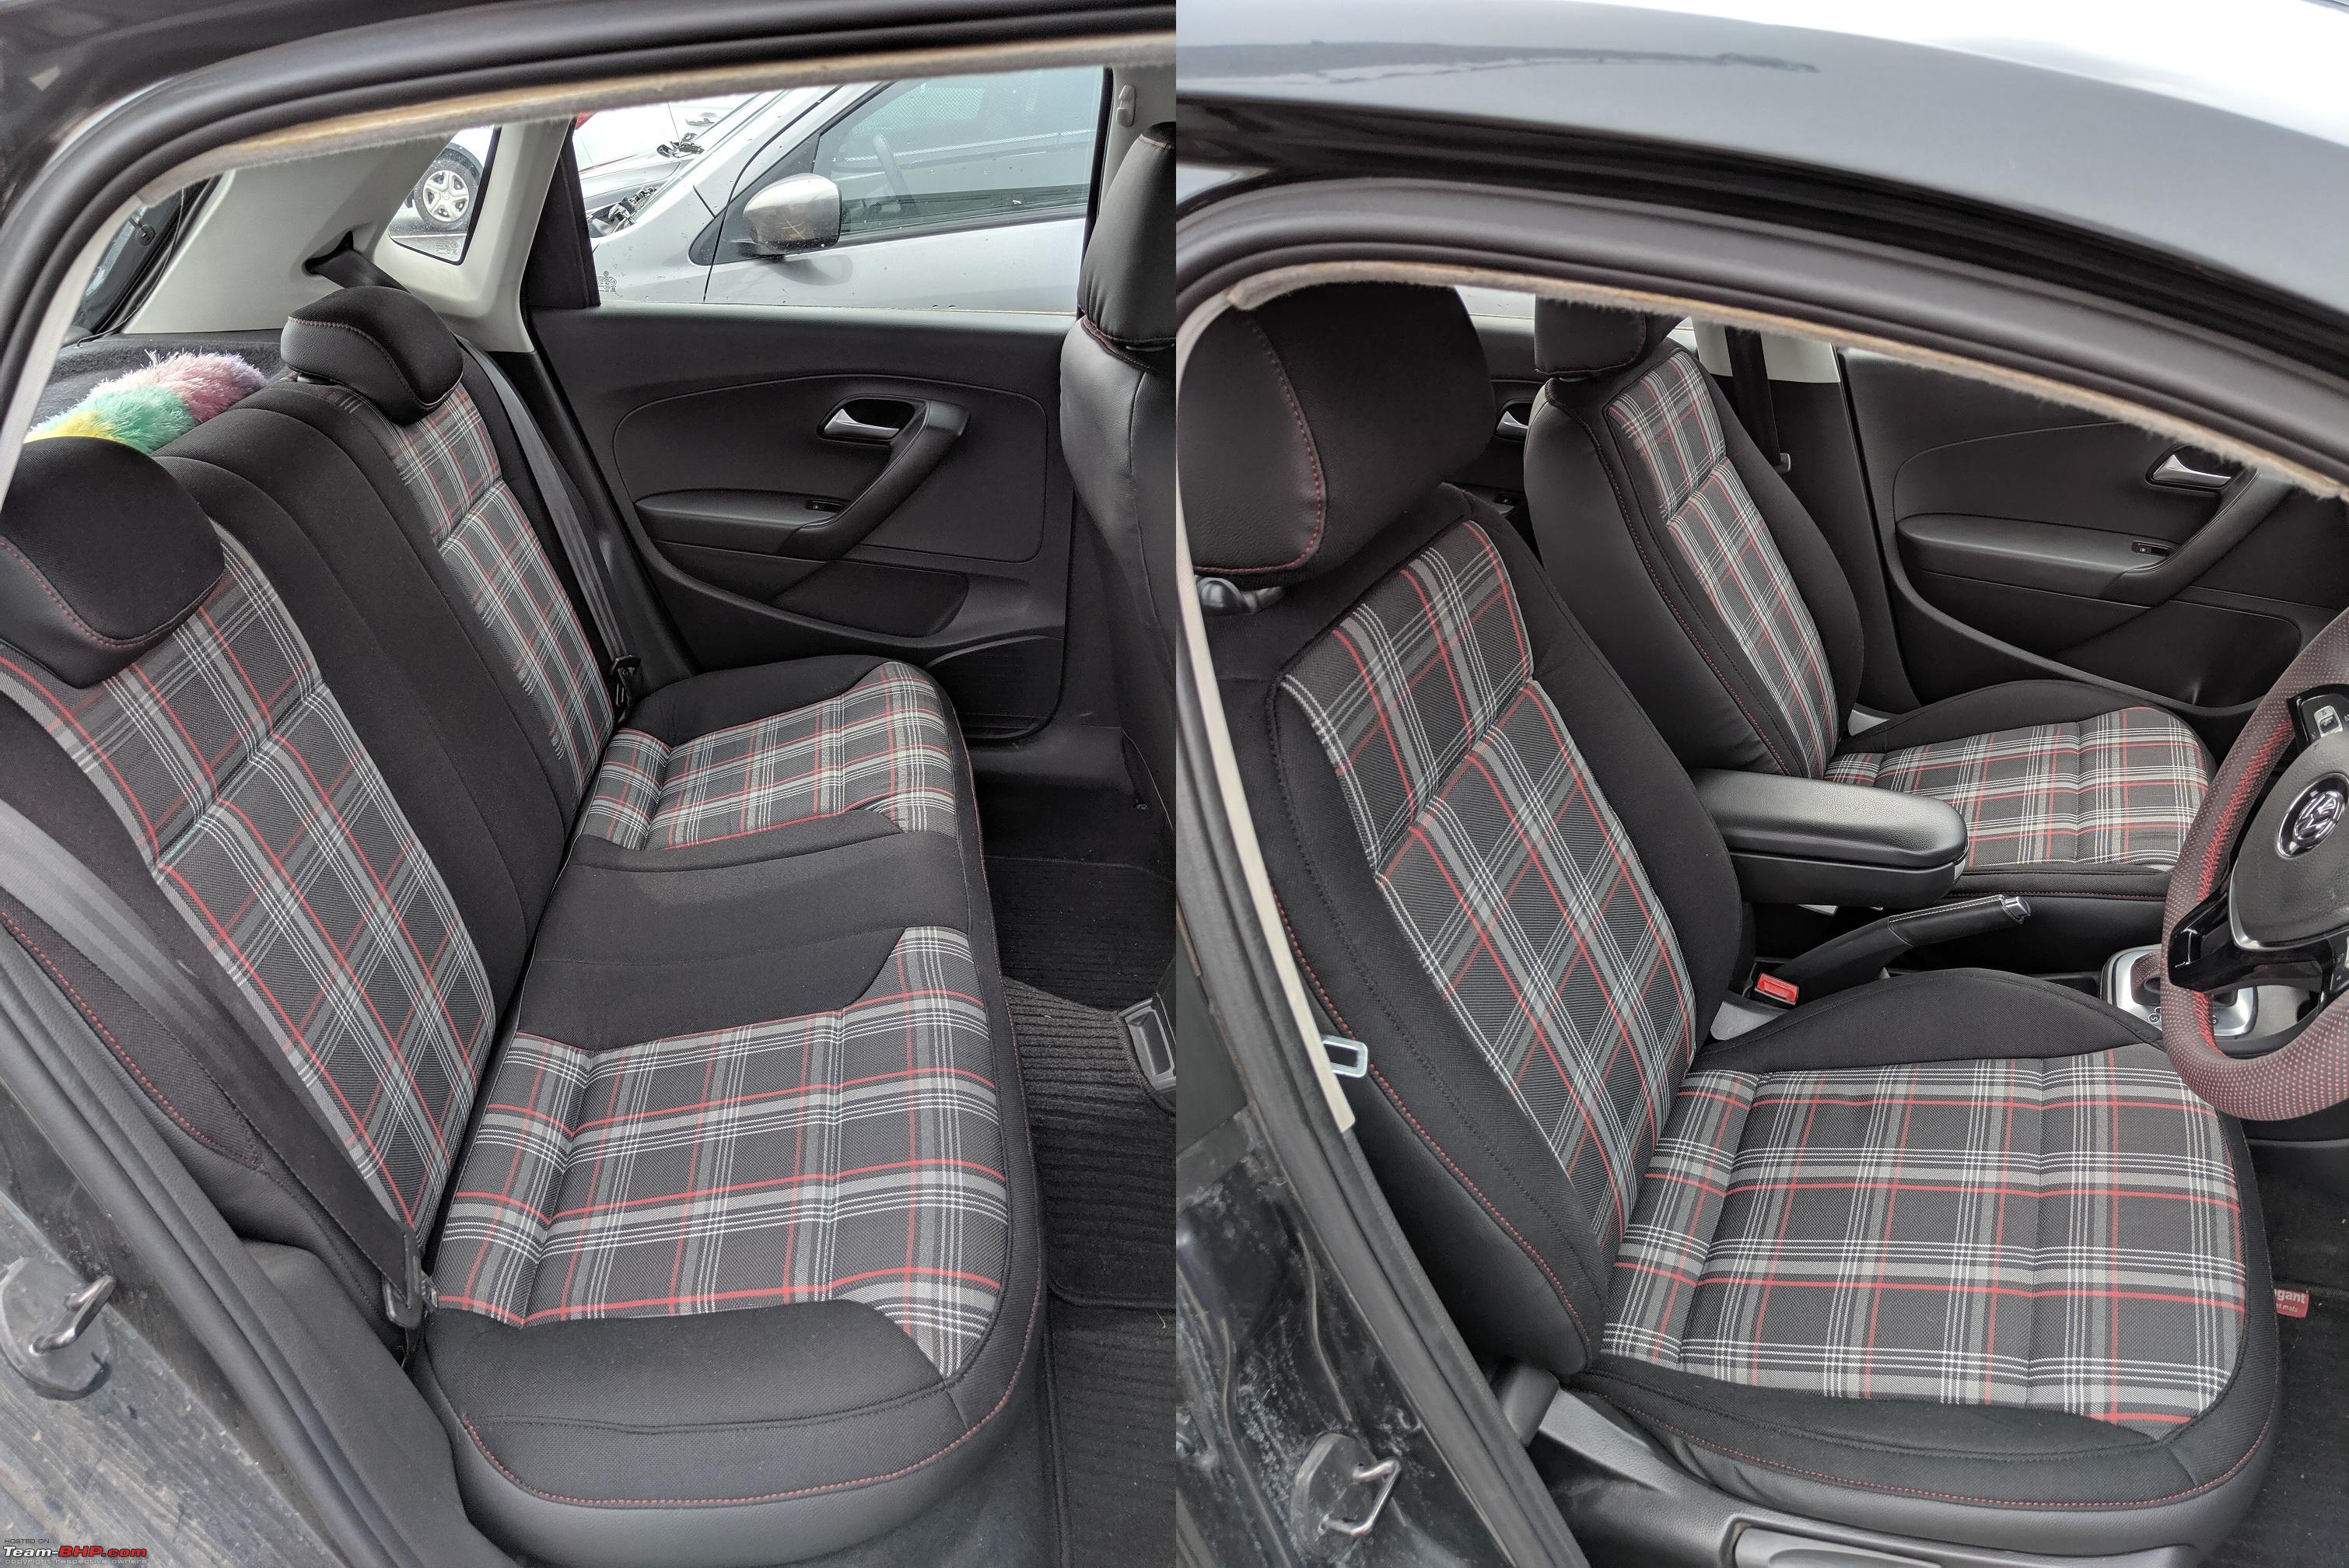 BLACK VOLKSWAGEN POLO GTI ALL YEAR Front Seat Covers / Protectors 1+1 | Heavy Duty Water Resistant